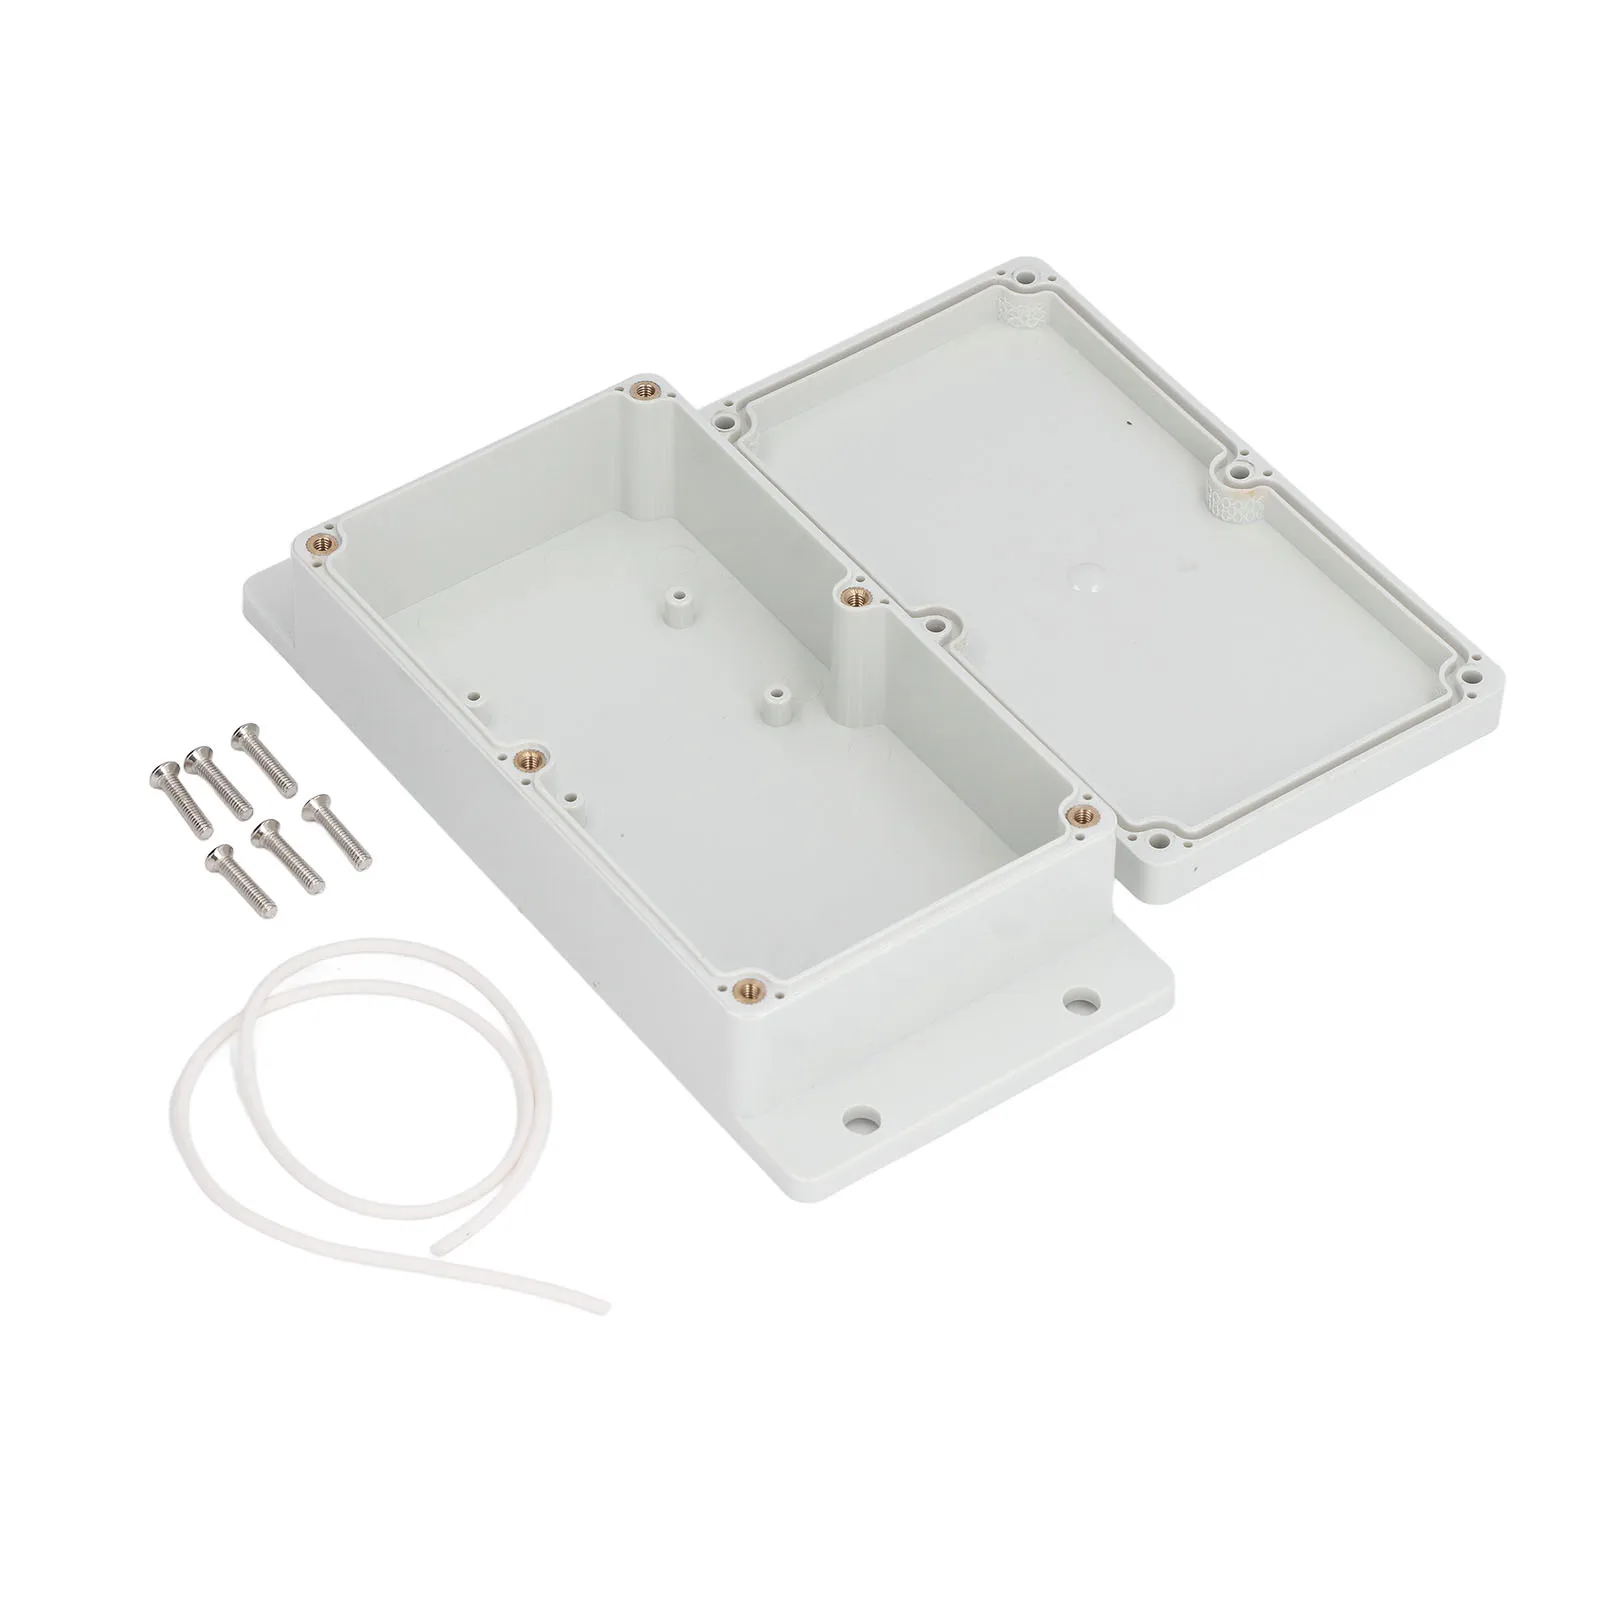 

Junction Box IP65 Waterproof Plastic Case Electronic Project Enclosure 158x90x46mm F7-2 Fixed Ear Power Supply